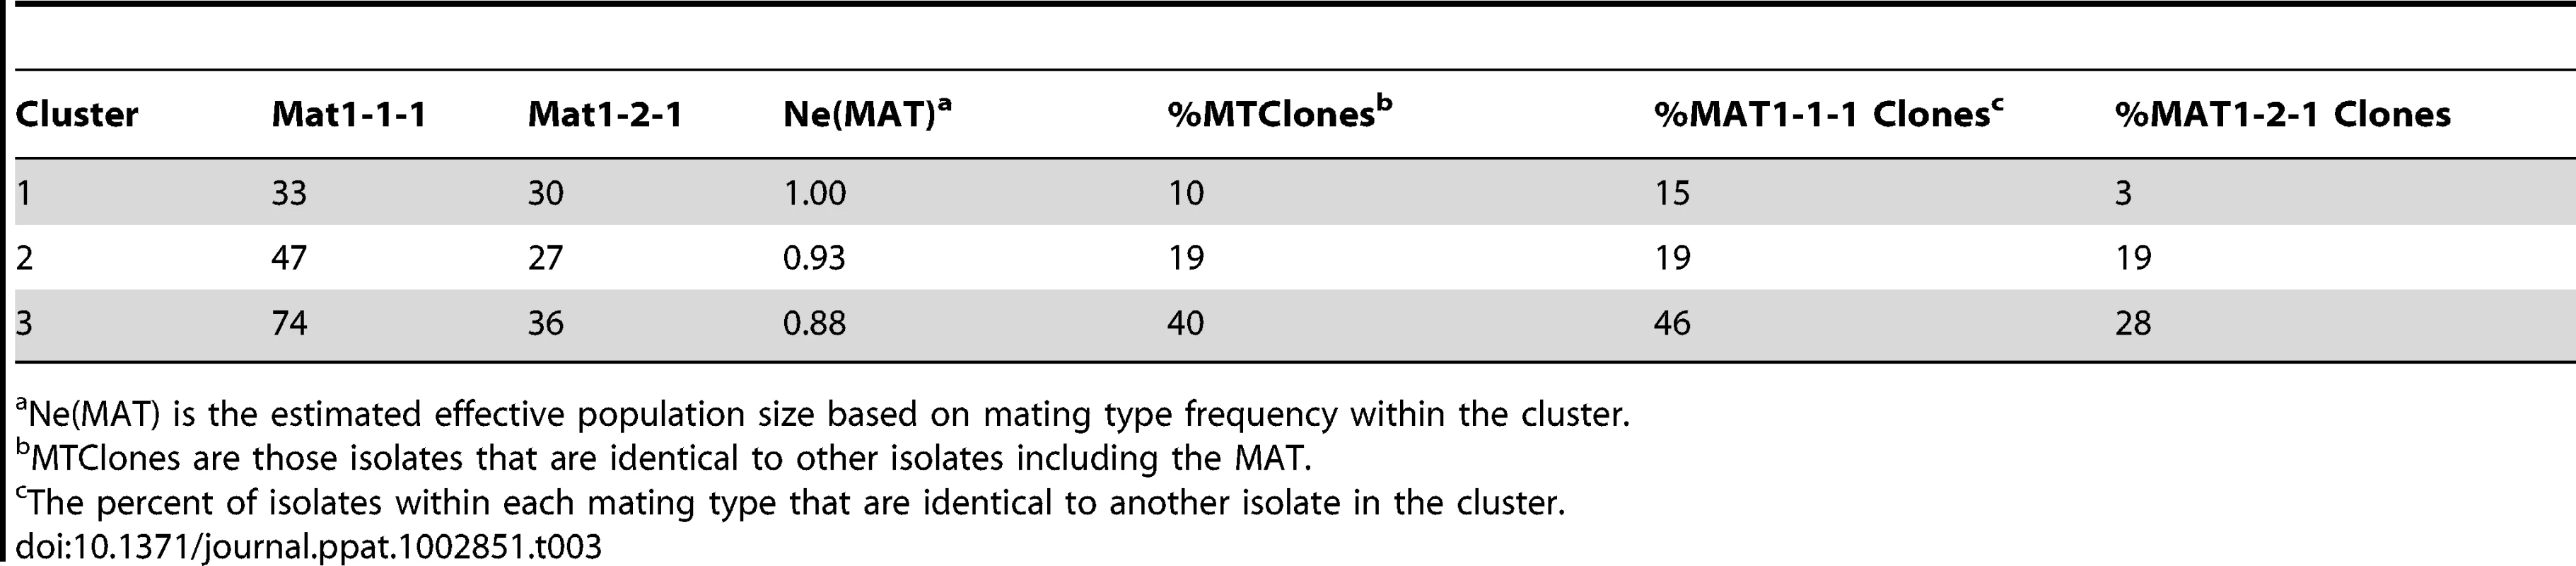 Mating type counts within clusters and the percent of isolates with MLMT identical to at least one other isolate in the sample.